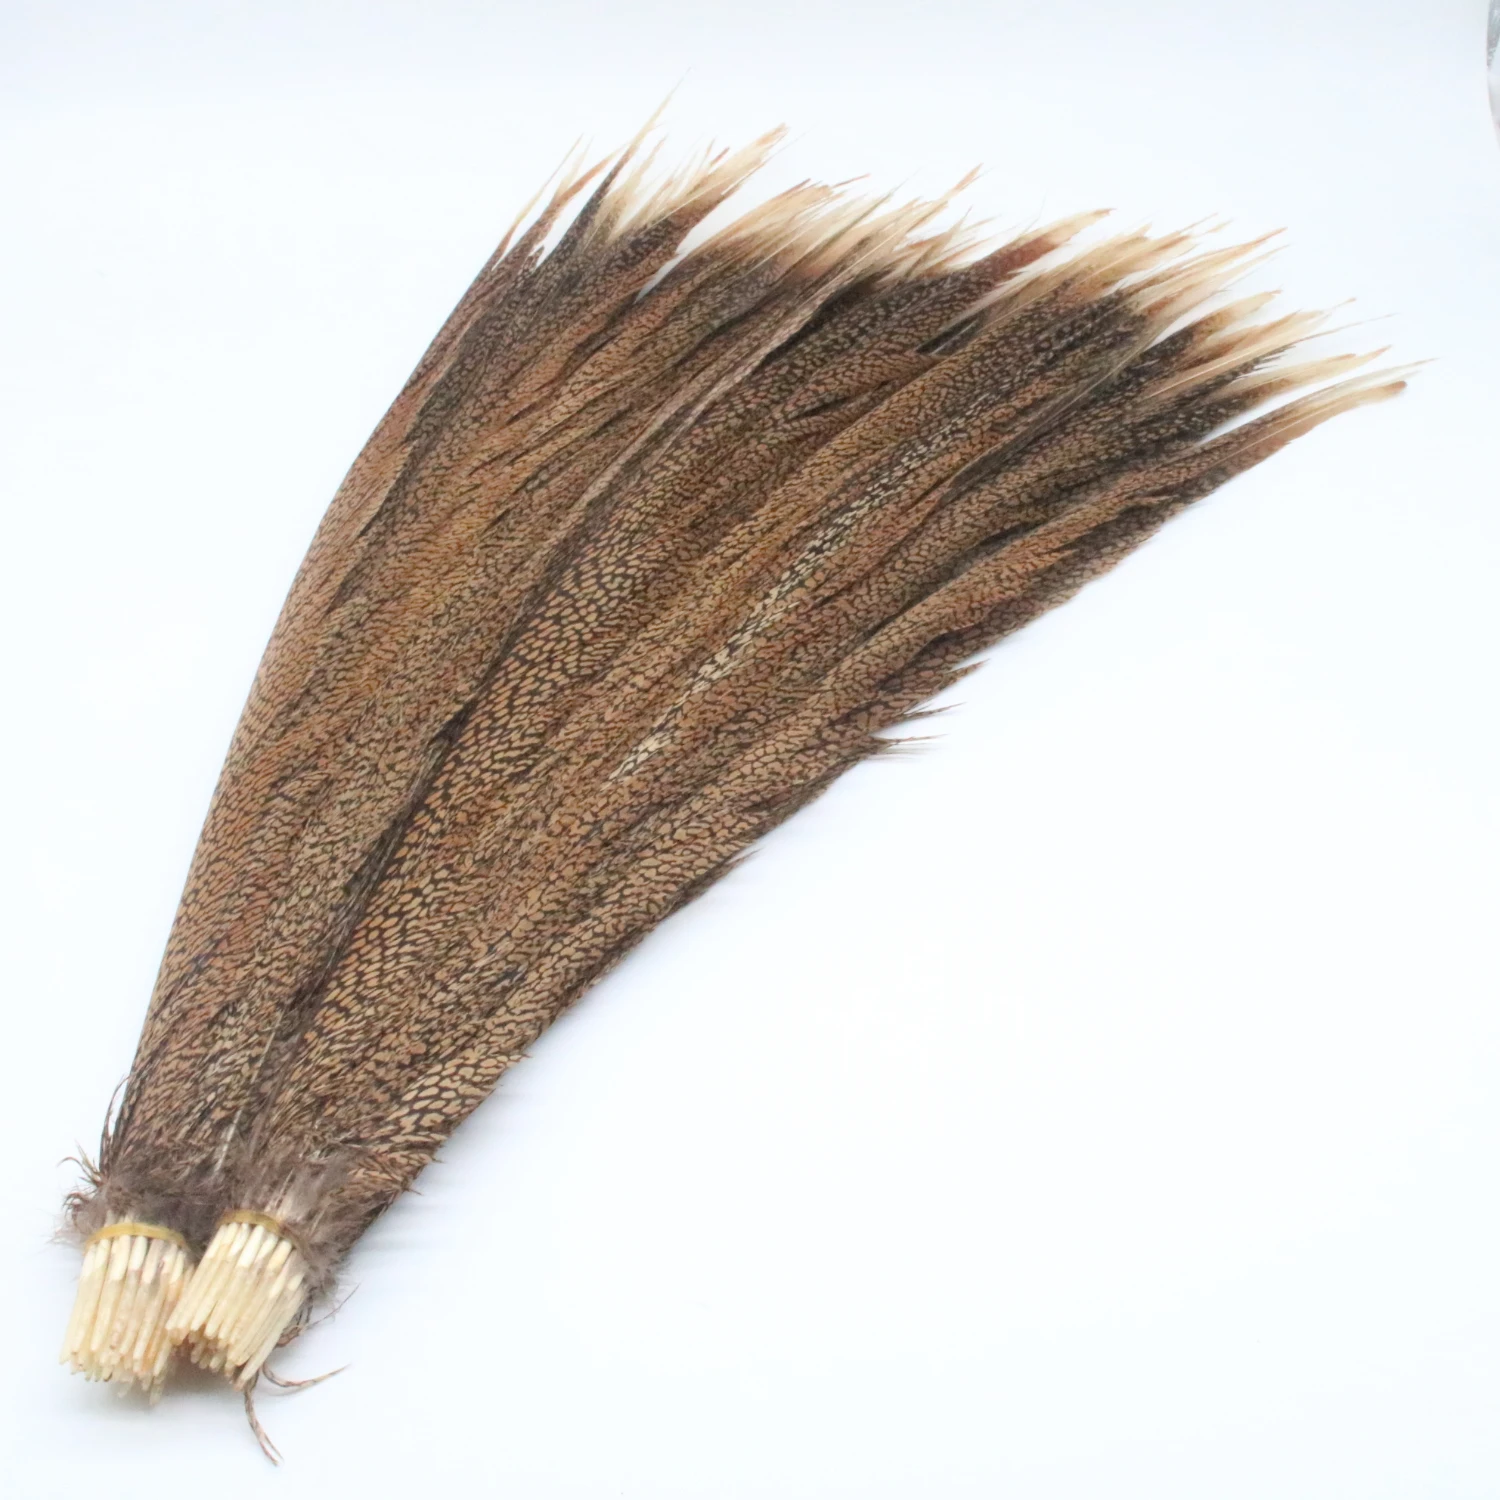 Wholesale 24-28inch/60-70cm Natural Pheasant Tail Feathers For Craft Celebration Decoration Lady Amherst Pheasant Feathers